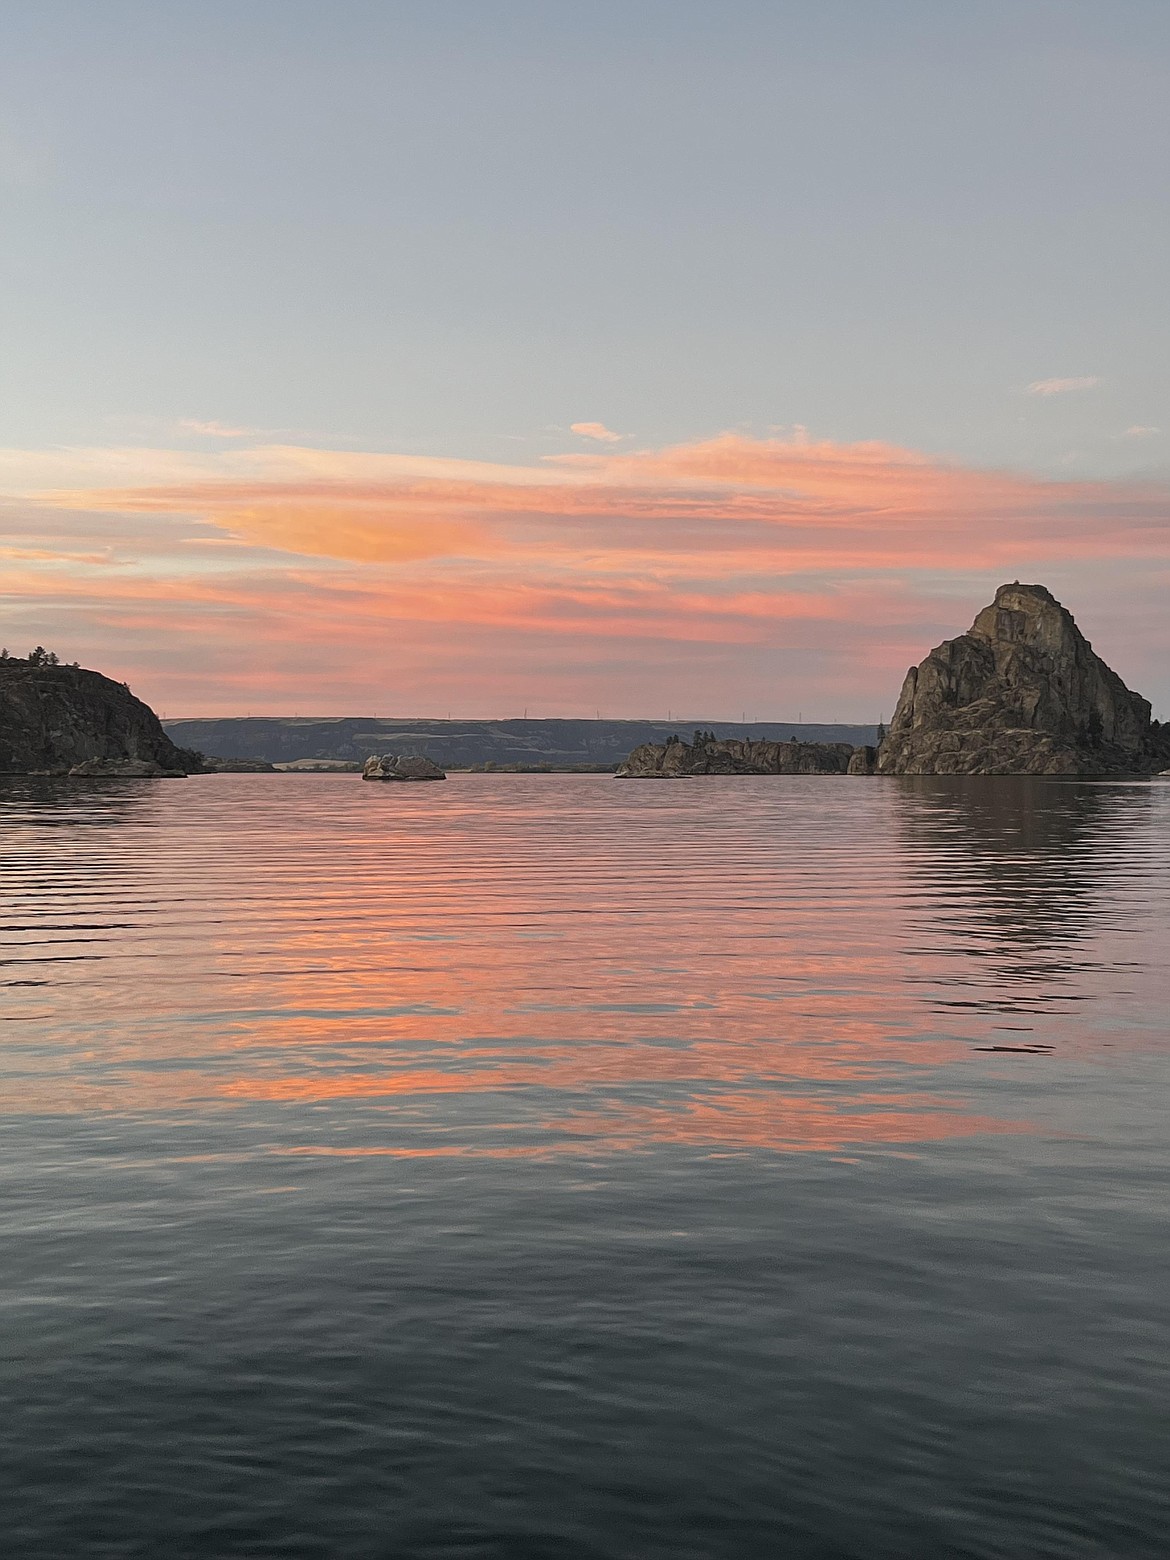 Sunset on Potholes Reservoir, which is another great time to catch rainbow trout, according to Dave Graybill.